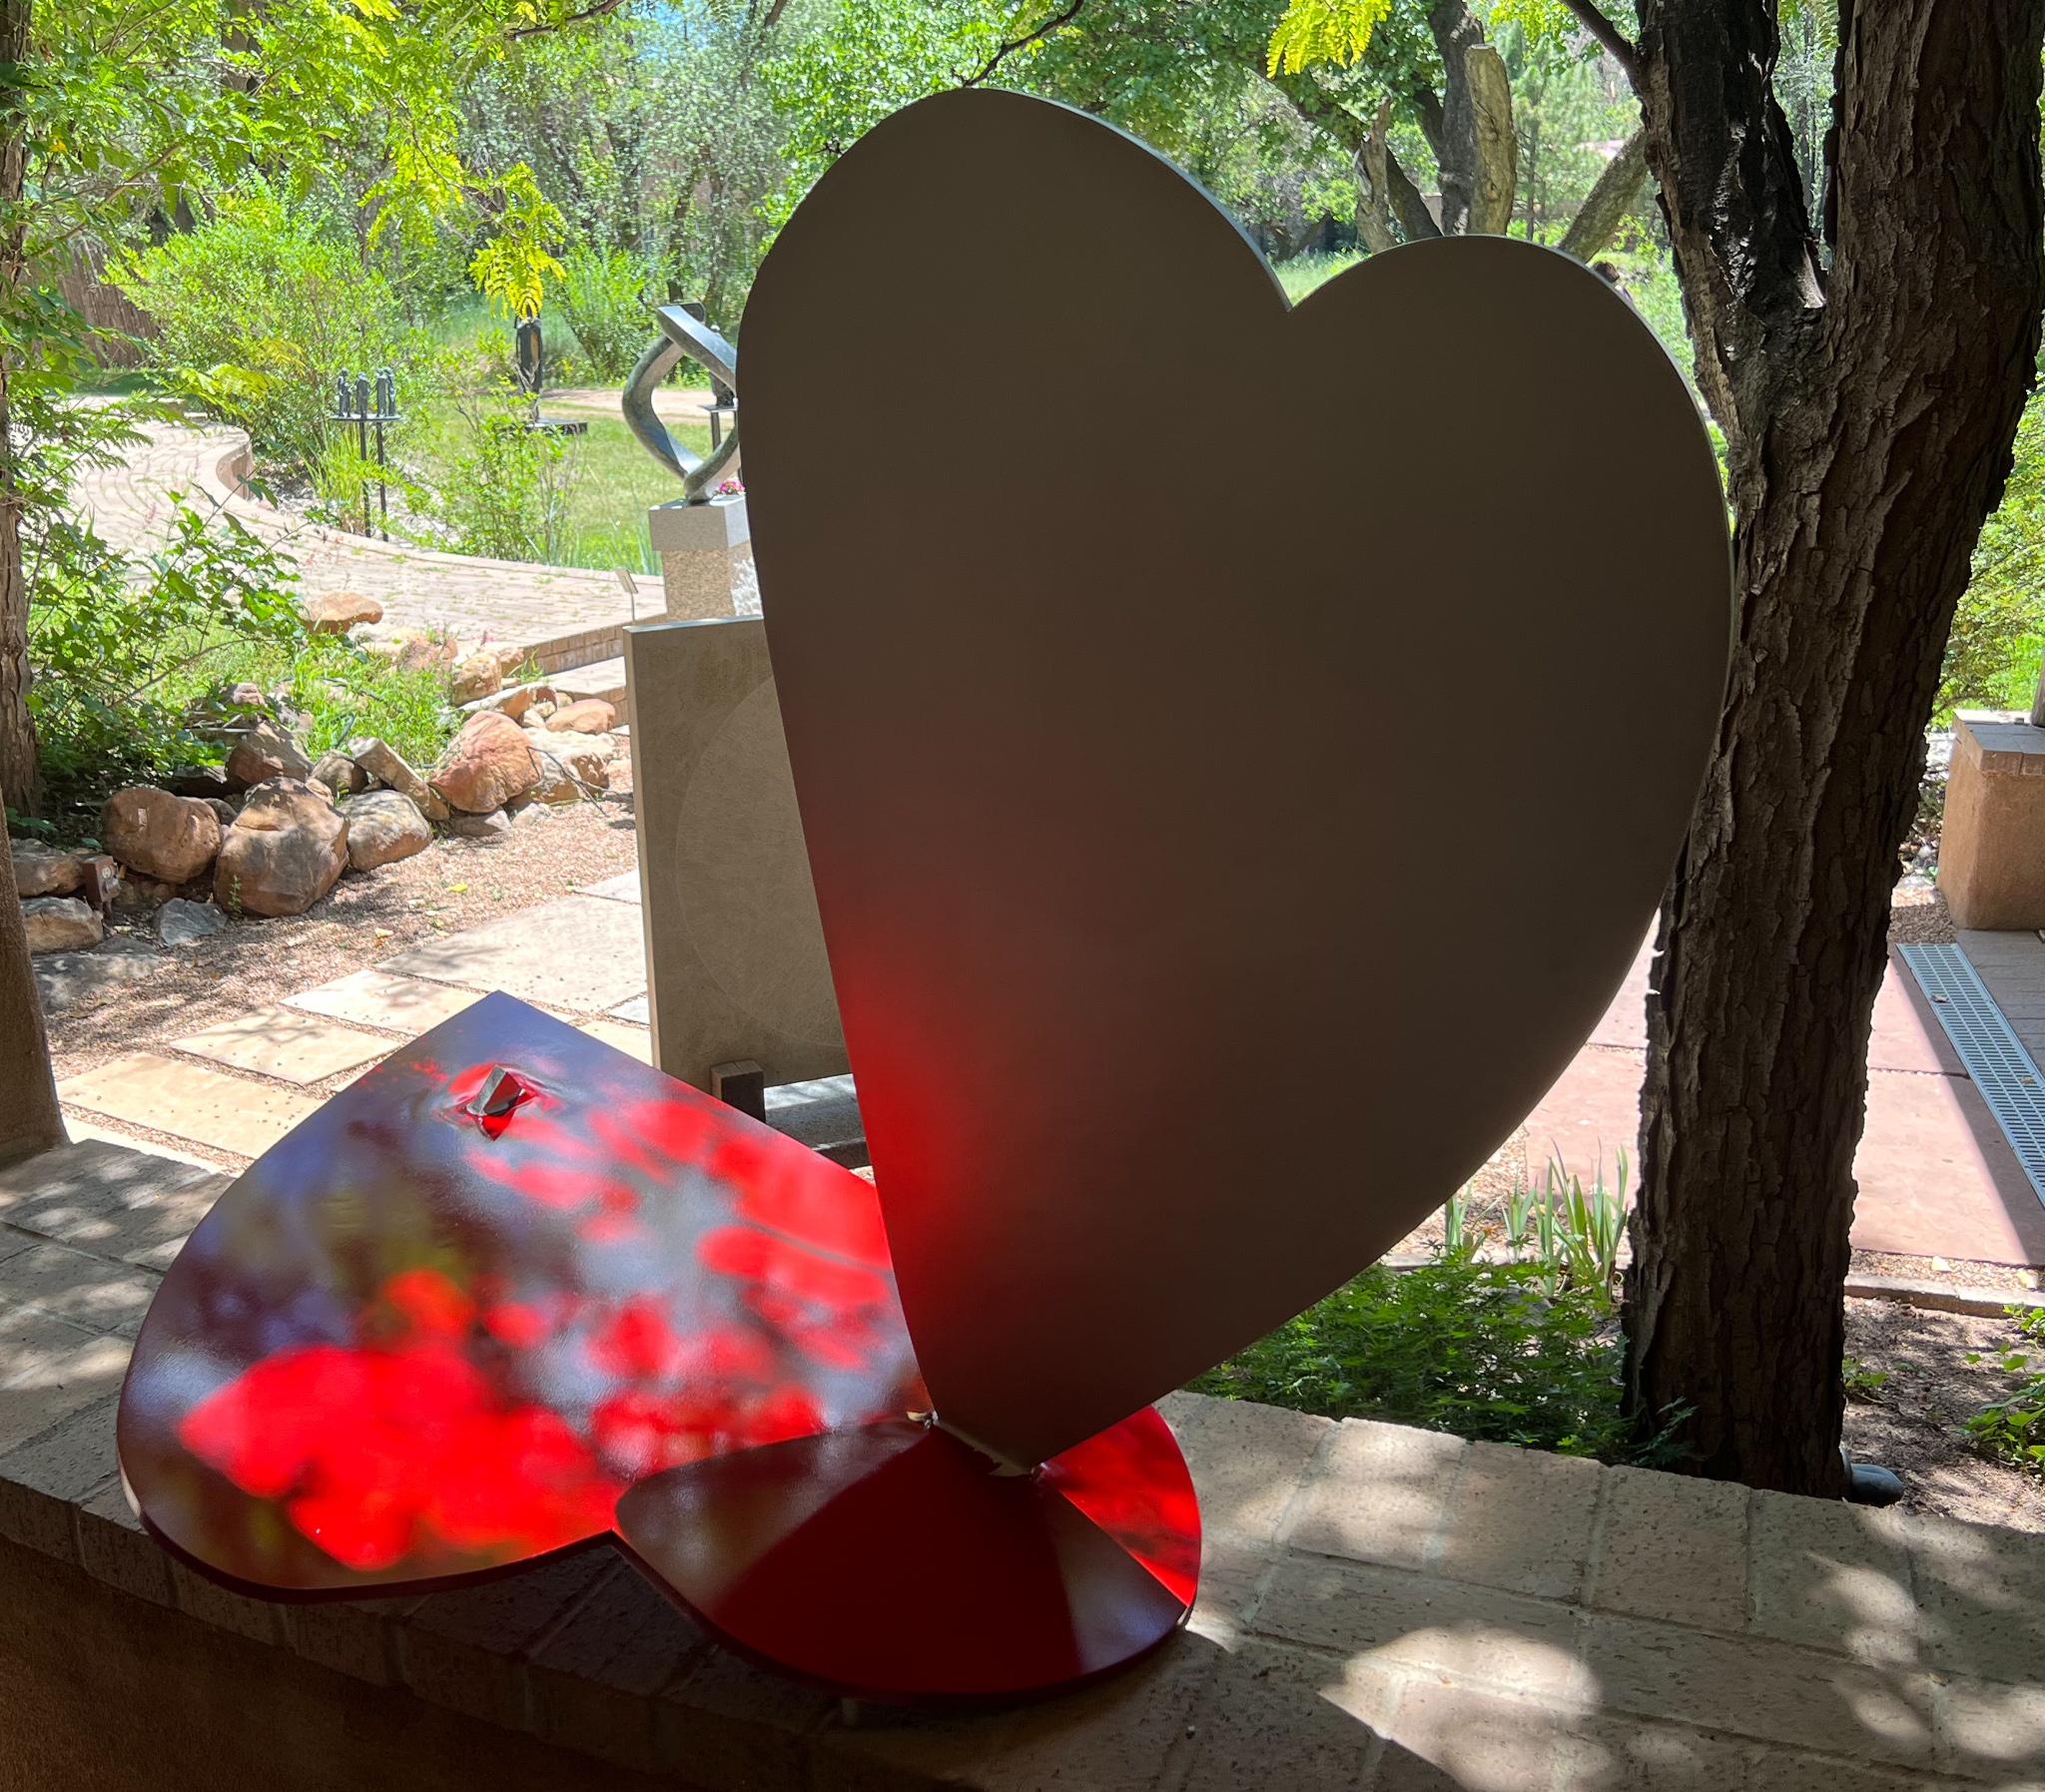 Three Balancing Hearts, sculpture, by Kerry Green, Santa Fe, red, silver, outside

Aluminum with painted surface 

limited edition 18

Since childhood, Kerry Green has always been creative; painting, drawing, sculpting, and sewing. Her family